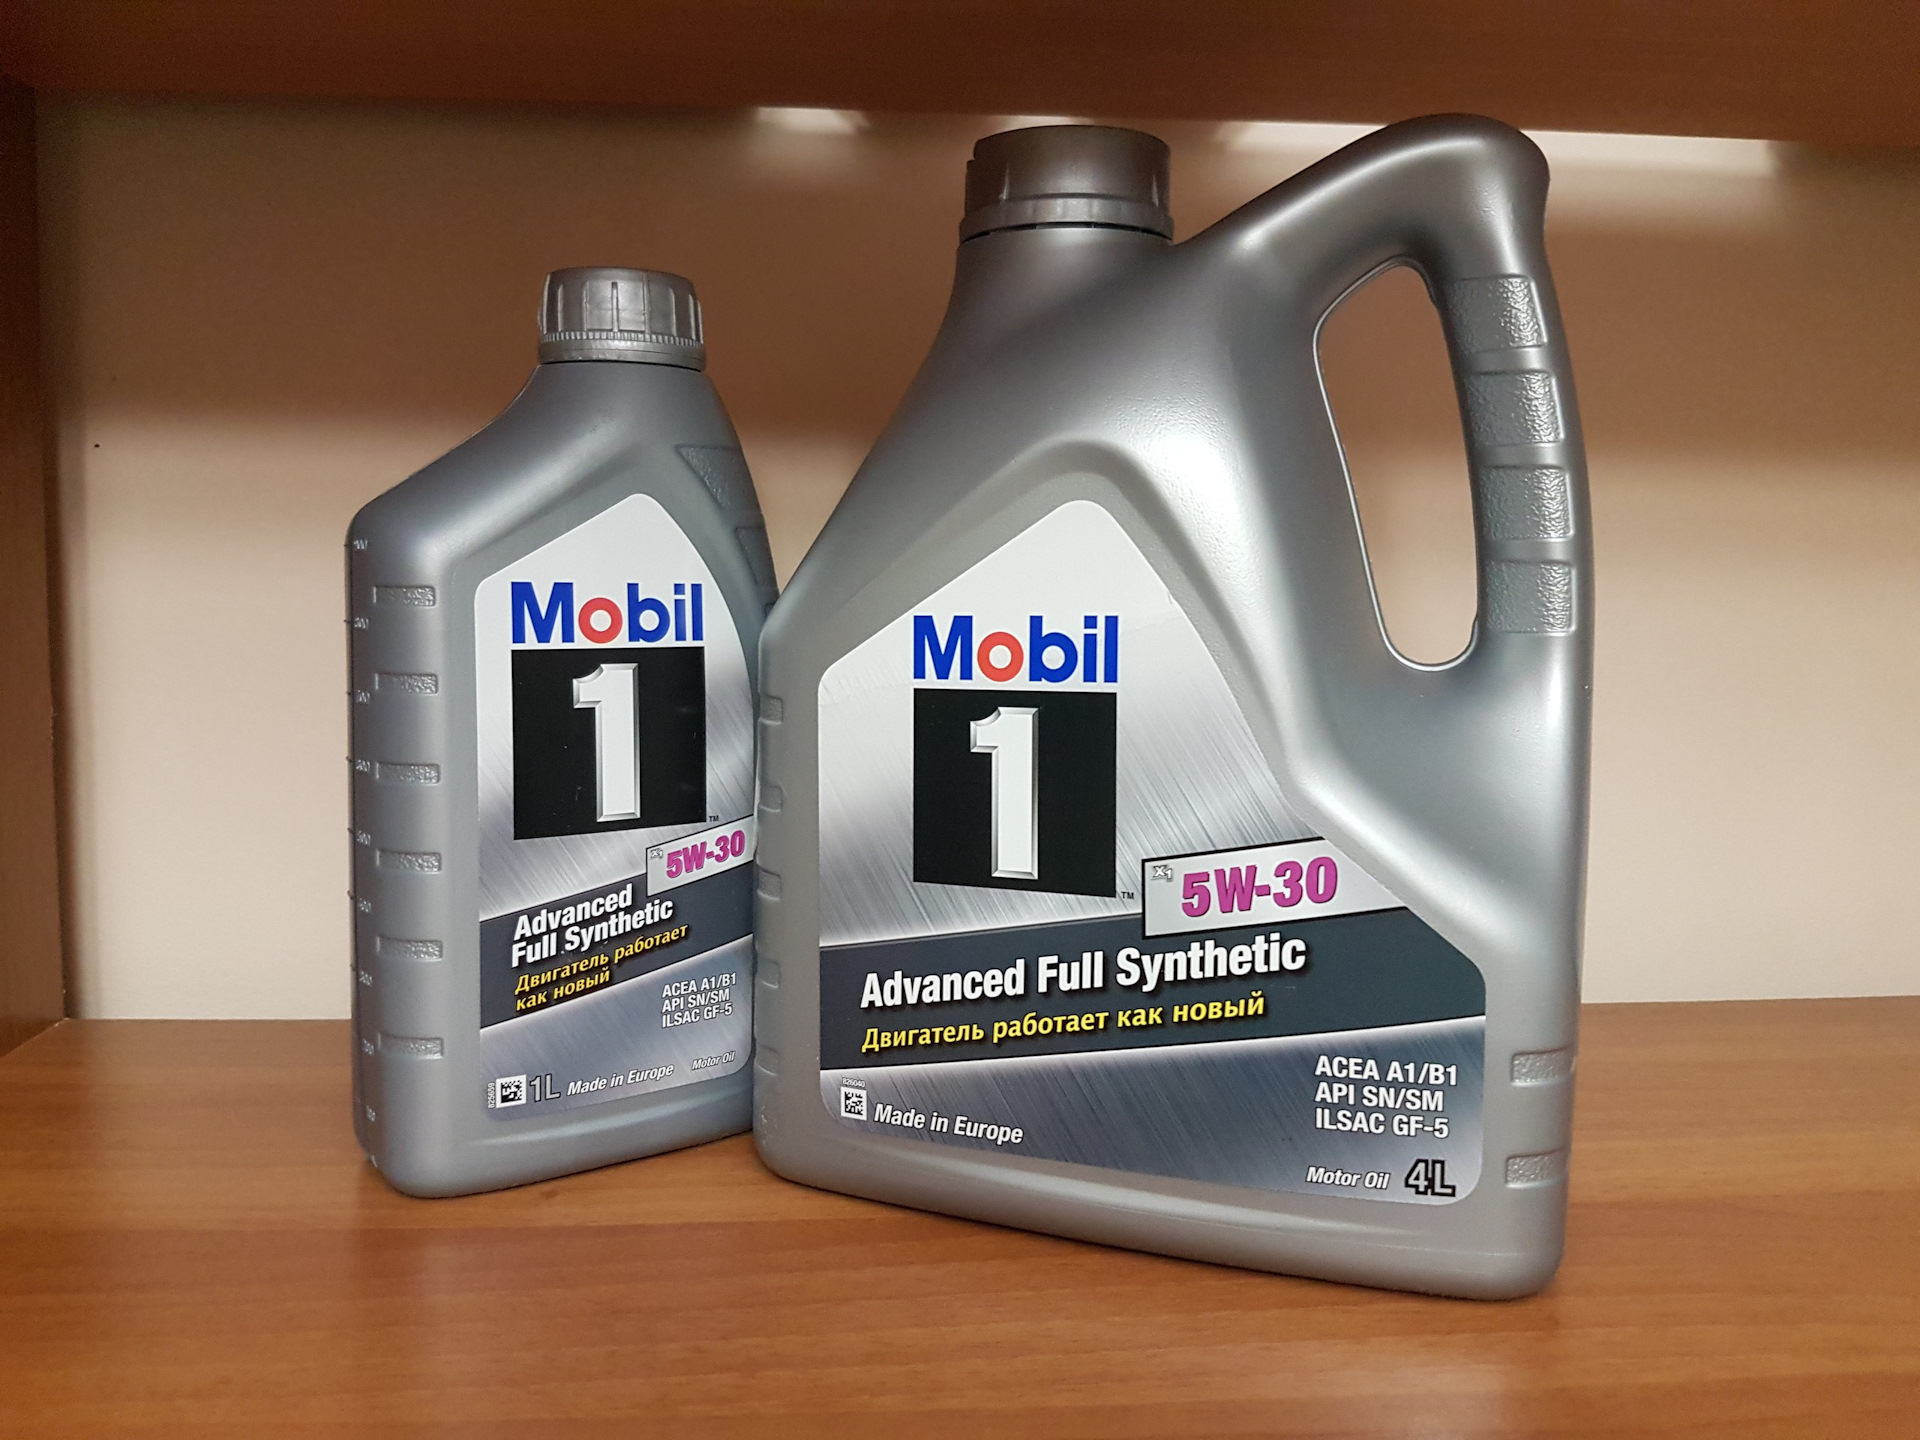 1 фул. Mobil 5w30 Advanced Full Synthetic артикул. Mobil Advanced Full Synthetic 5w40 артикул. Mobil 5-30 Full Synthetic. Mobil 1 15w-50 Full Synthetic.